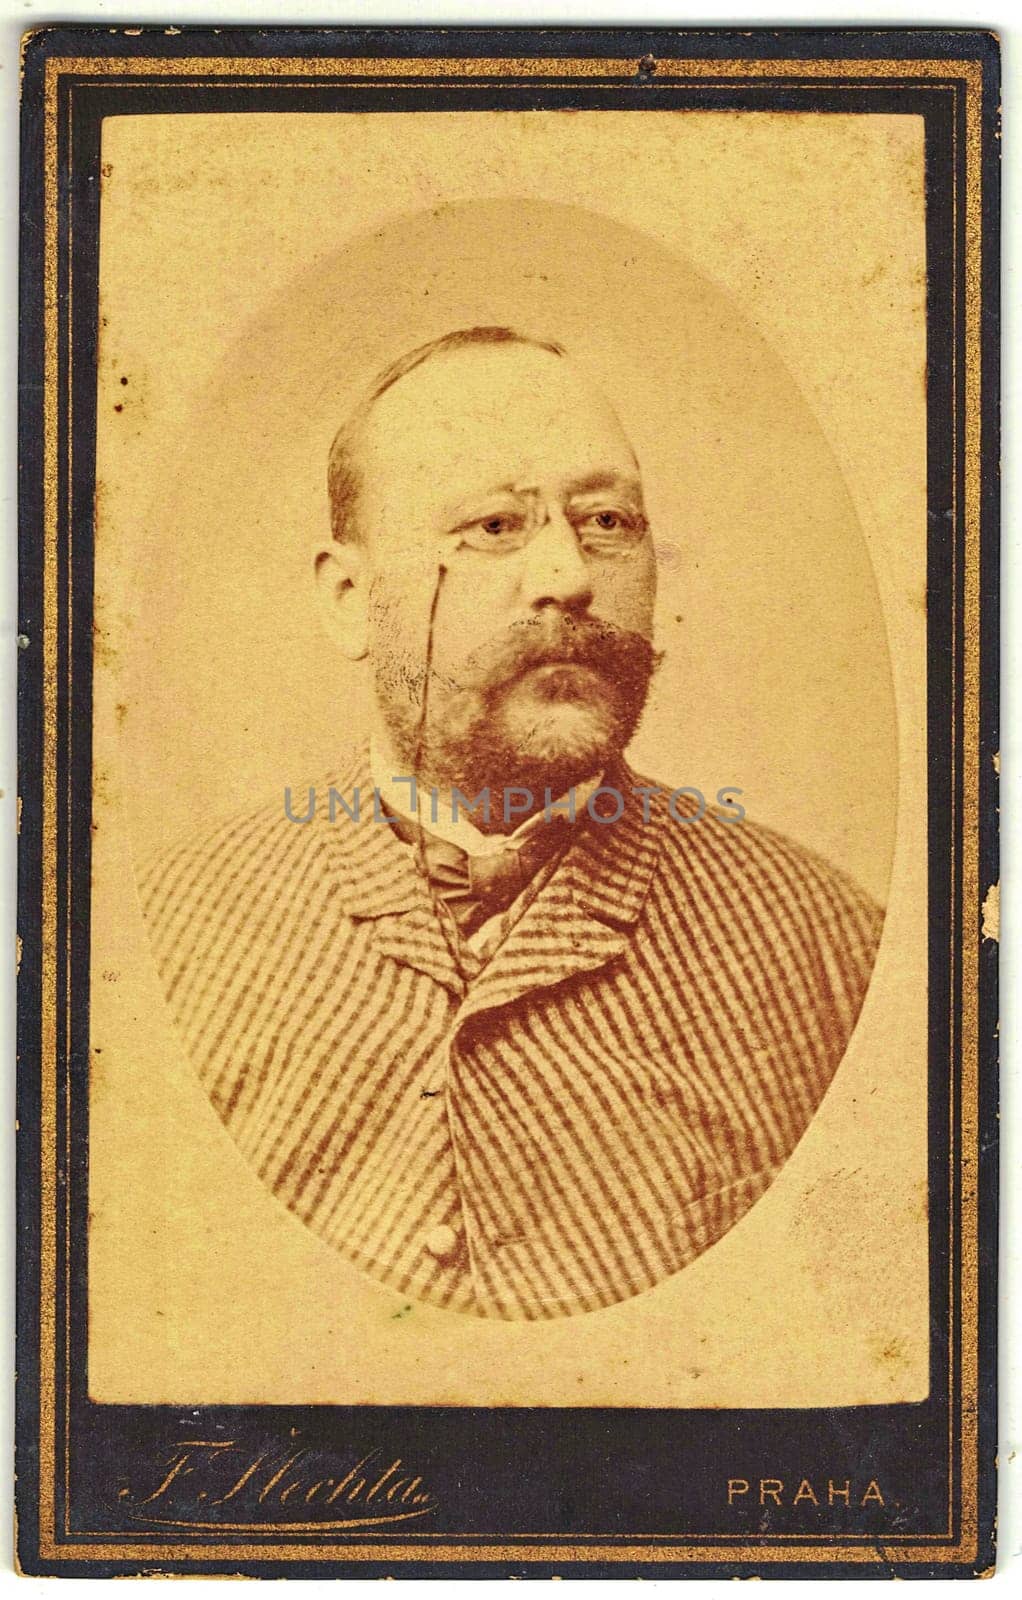 Vintage cabinet card shows portrait of elderly man. Edwardian fashion. Photo was taken in a photo studio. Photo was taken in Austro-Hungarian Empire or also Austro-Hungarian Monarchy by roman_nerud